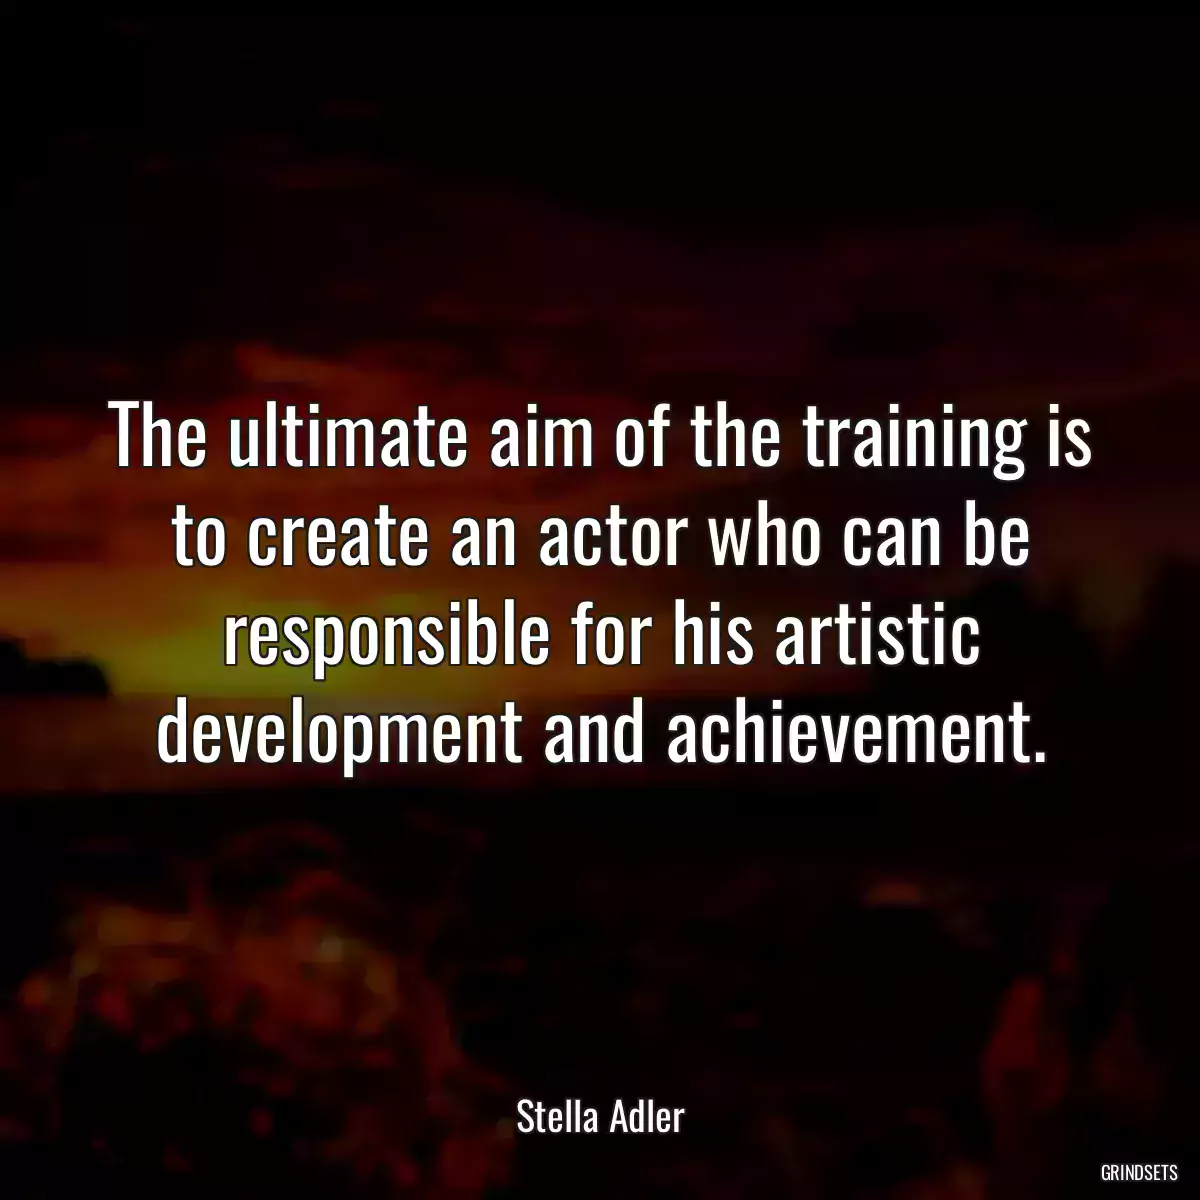 The ultimate aim of the training is to create an actor who can be responsible for his artistic development and achievement.